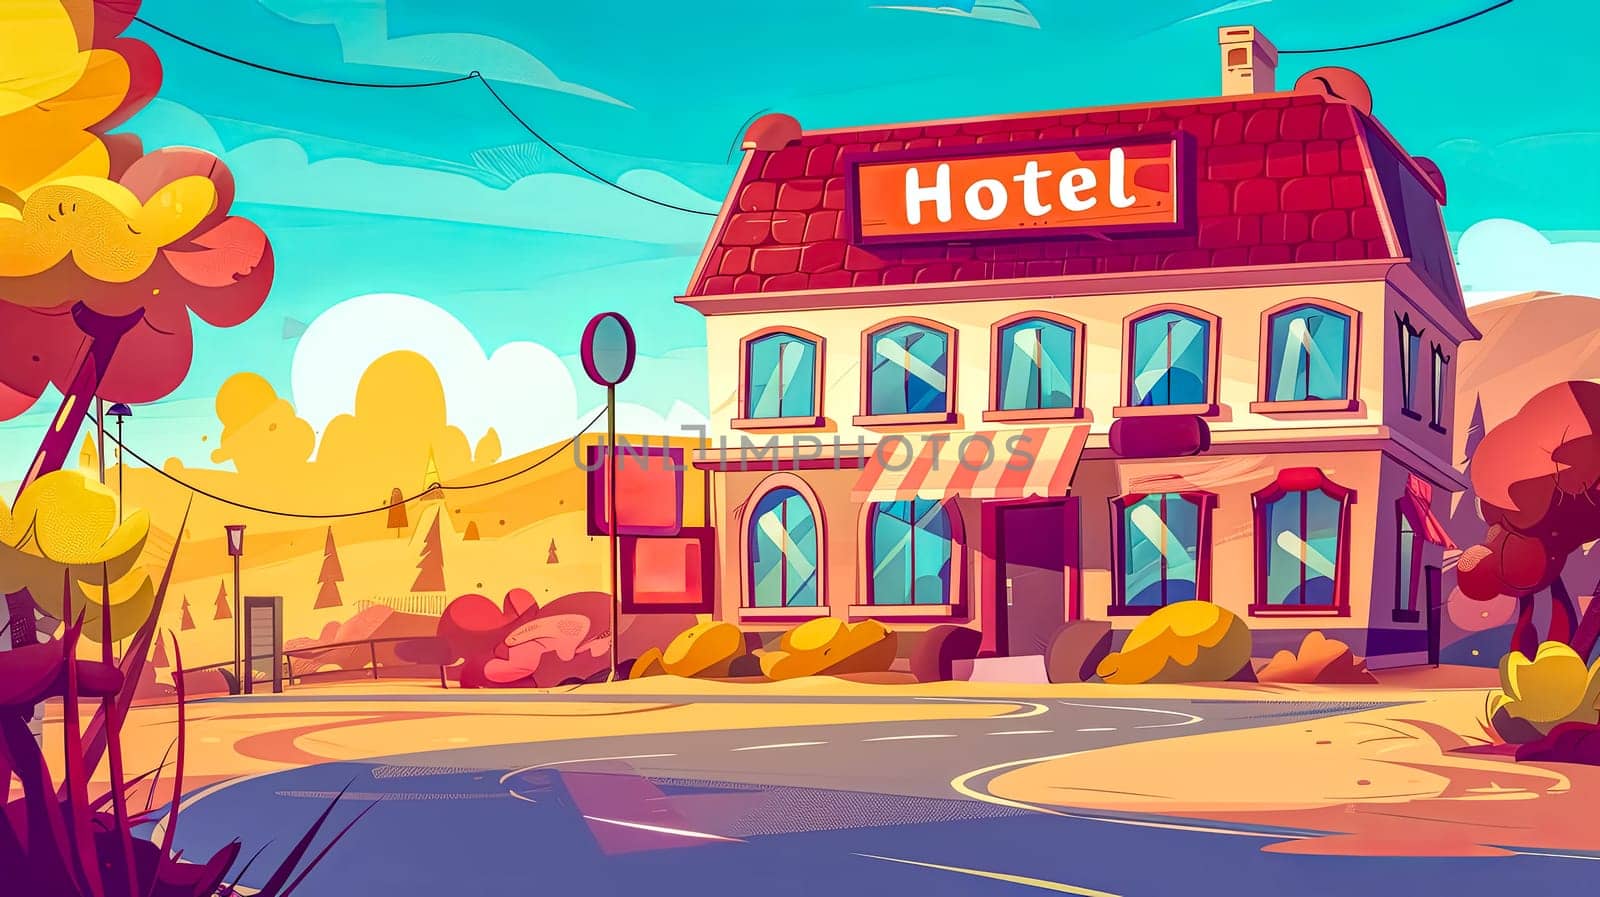 Vibrant digital illustration of a charming hotel in a whimsical, colorful small town landscape